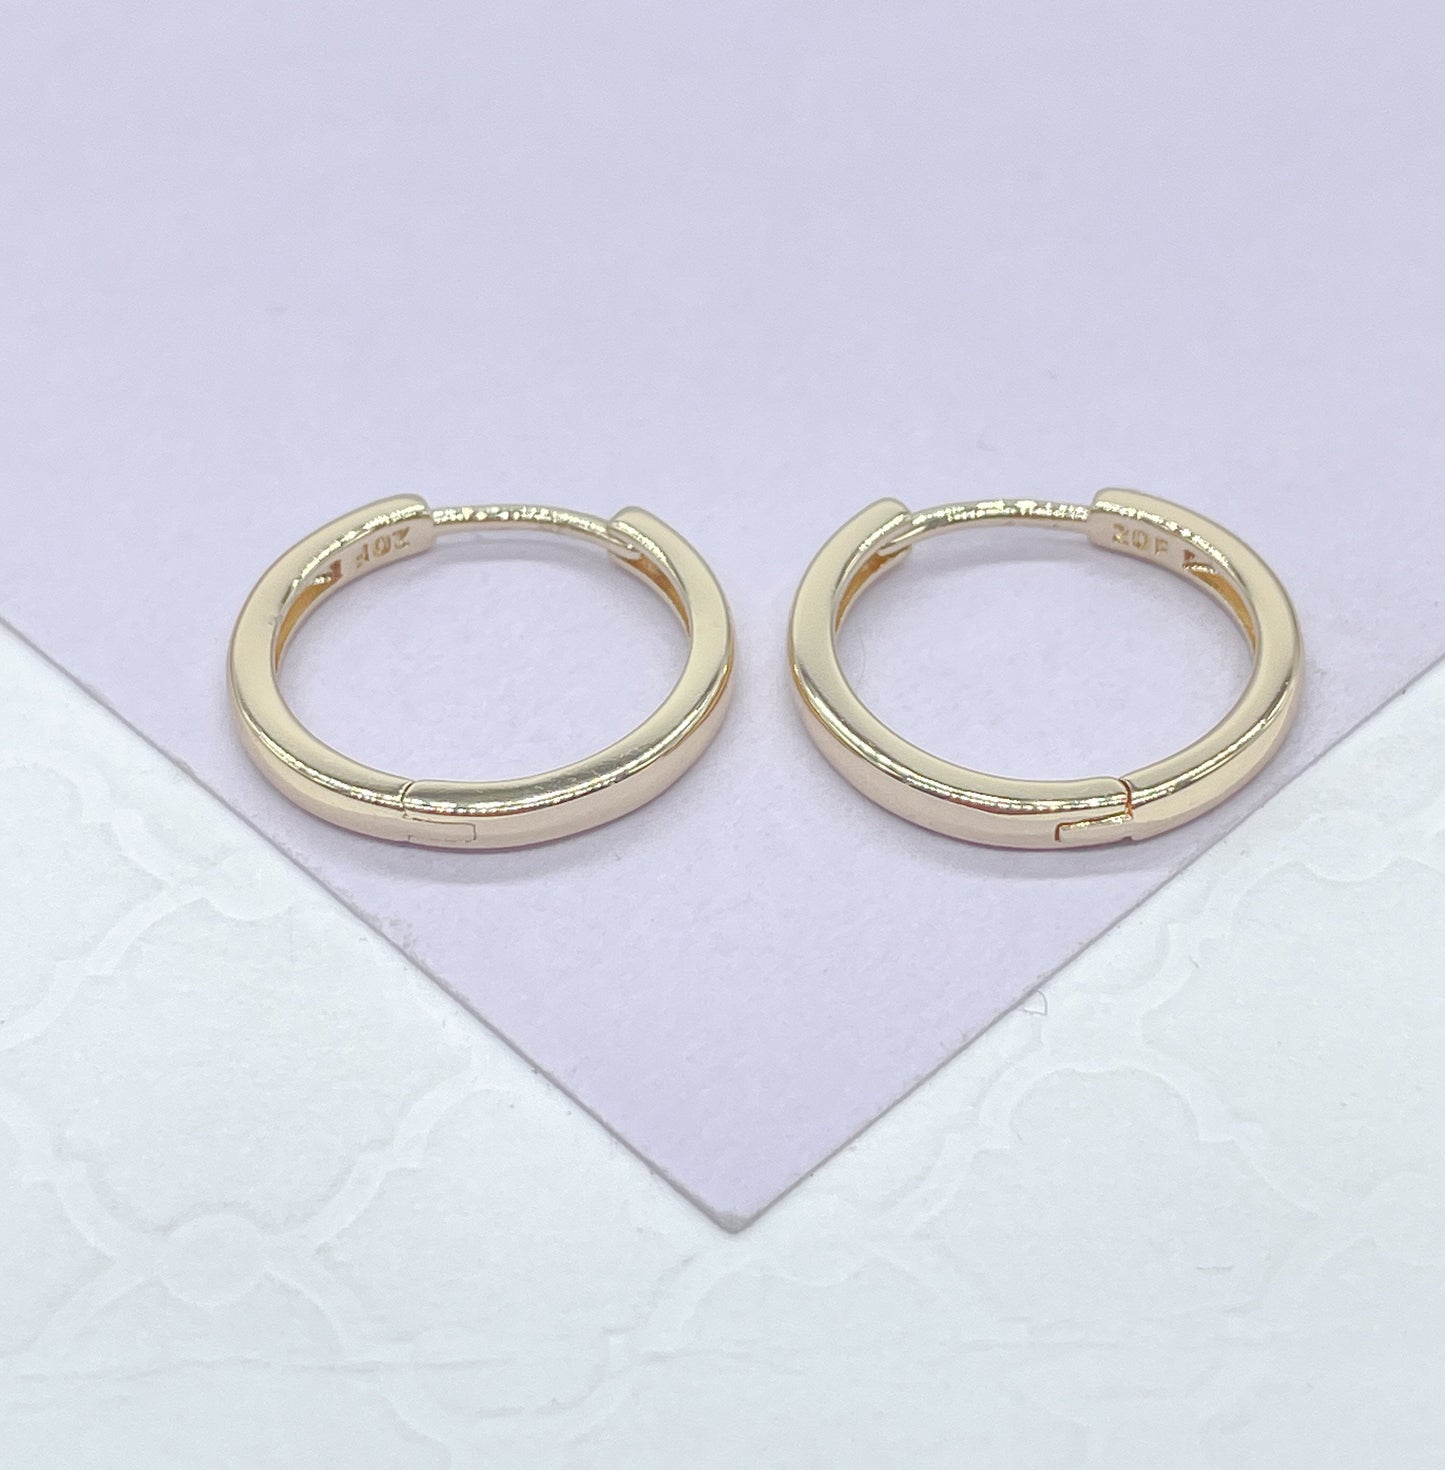 18k Gold Filled Ultra Thin Small Plain Sharp Edged Huggie-Hoop Earrings, Daily Jewlery, Gifts for her, Birthday Gift, Dainty Hoops